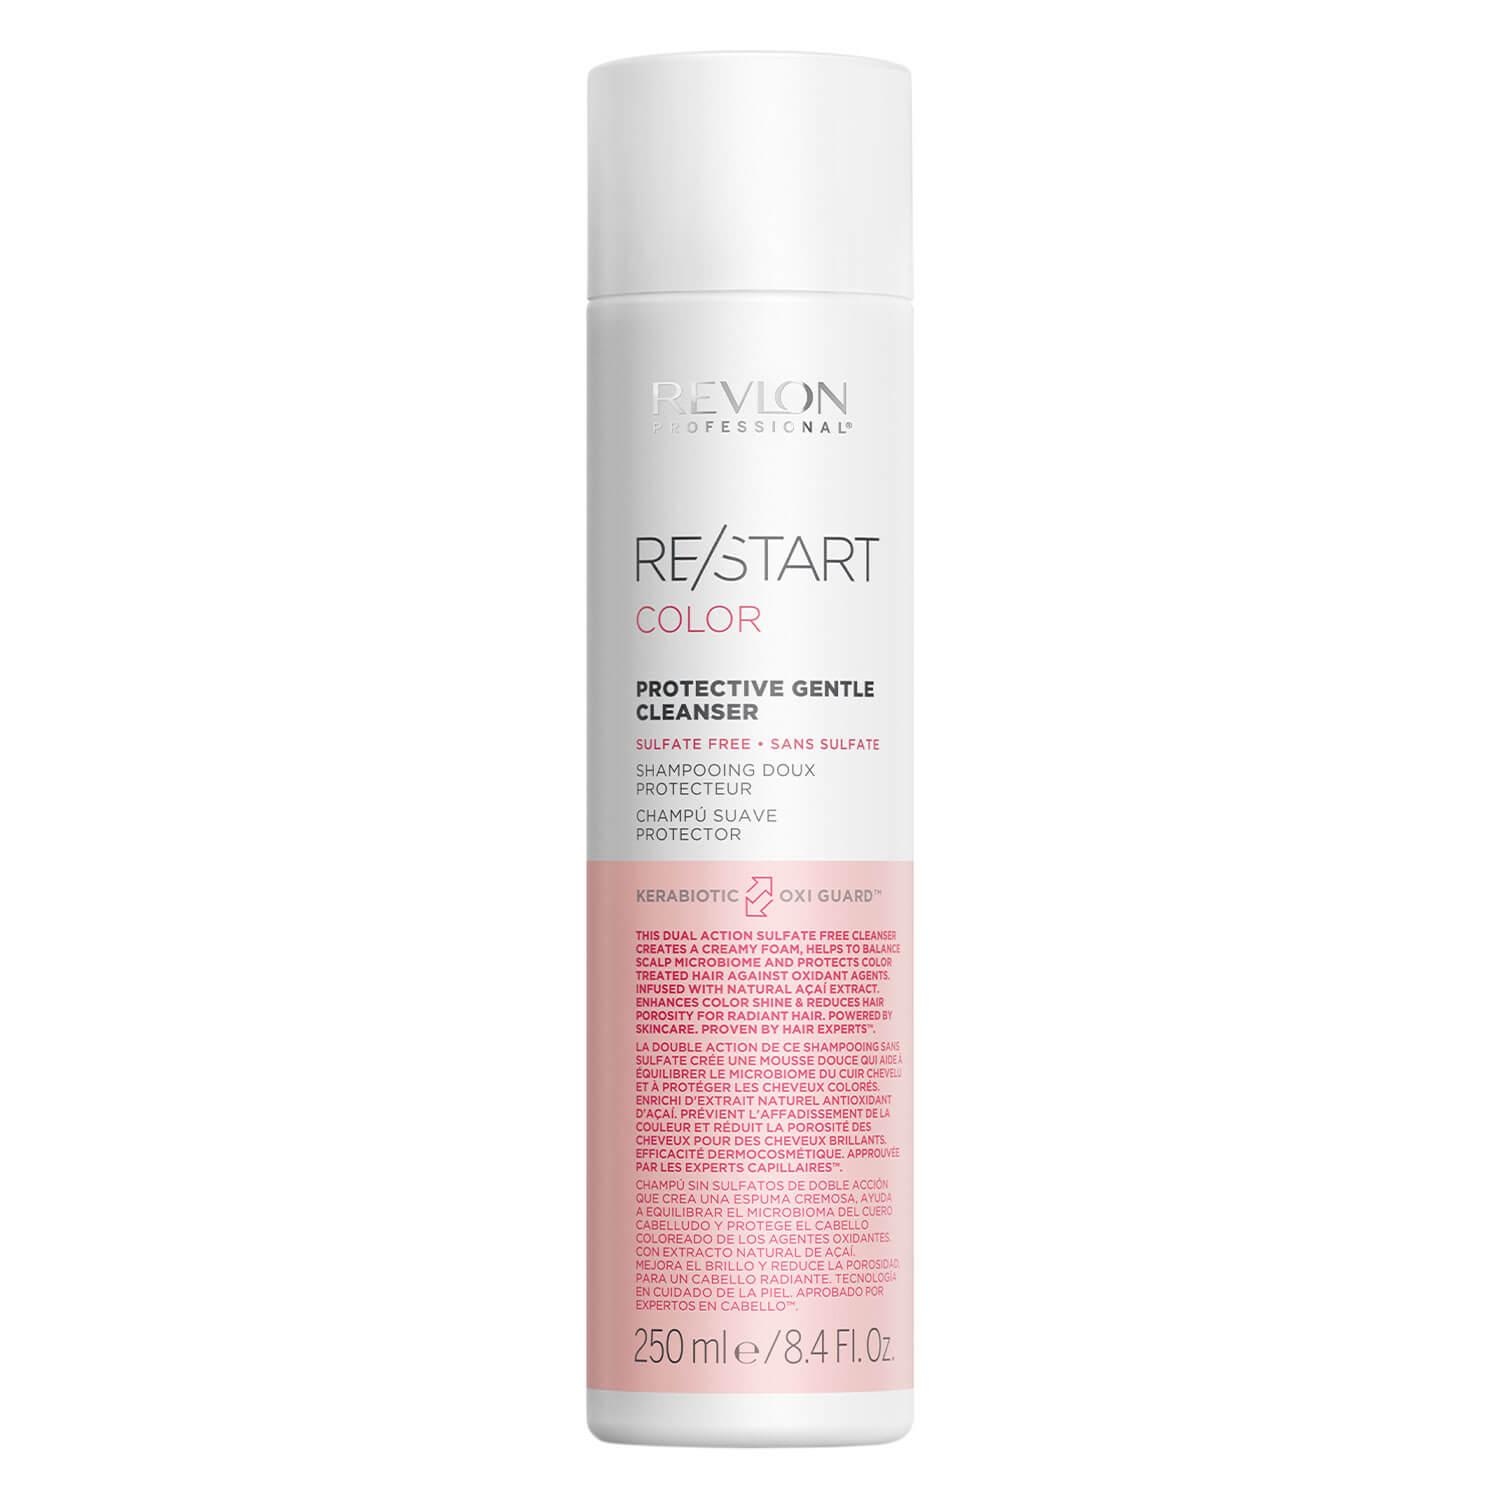 RE/START COLOR - Protective Gentle Cleanser